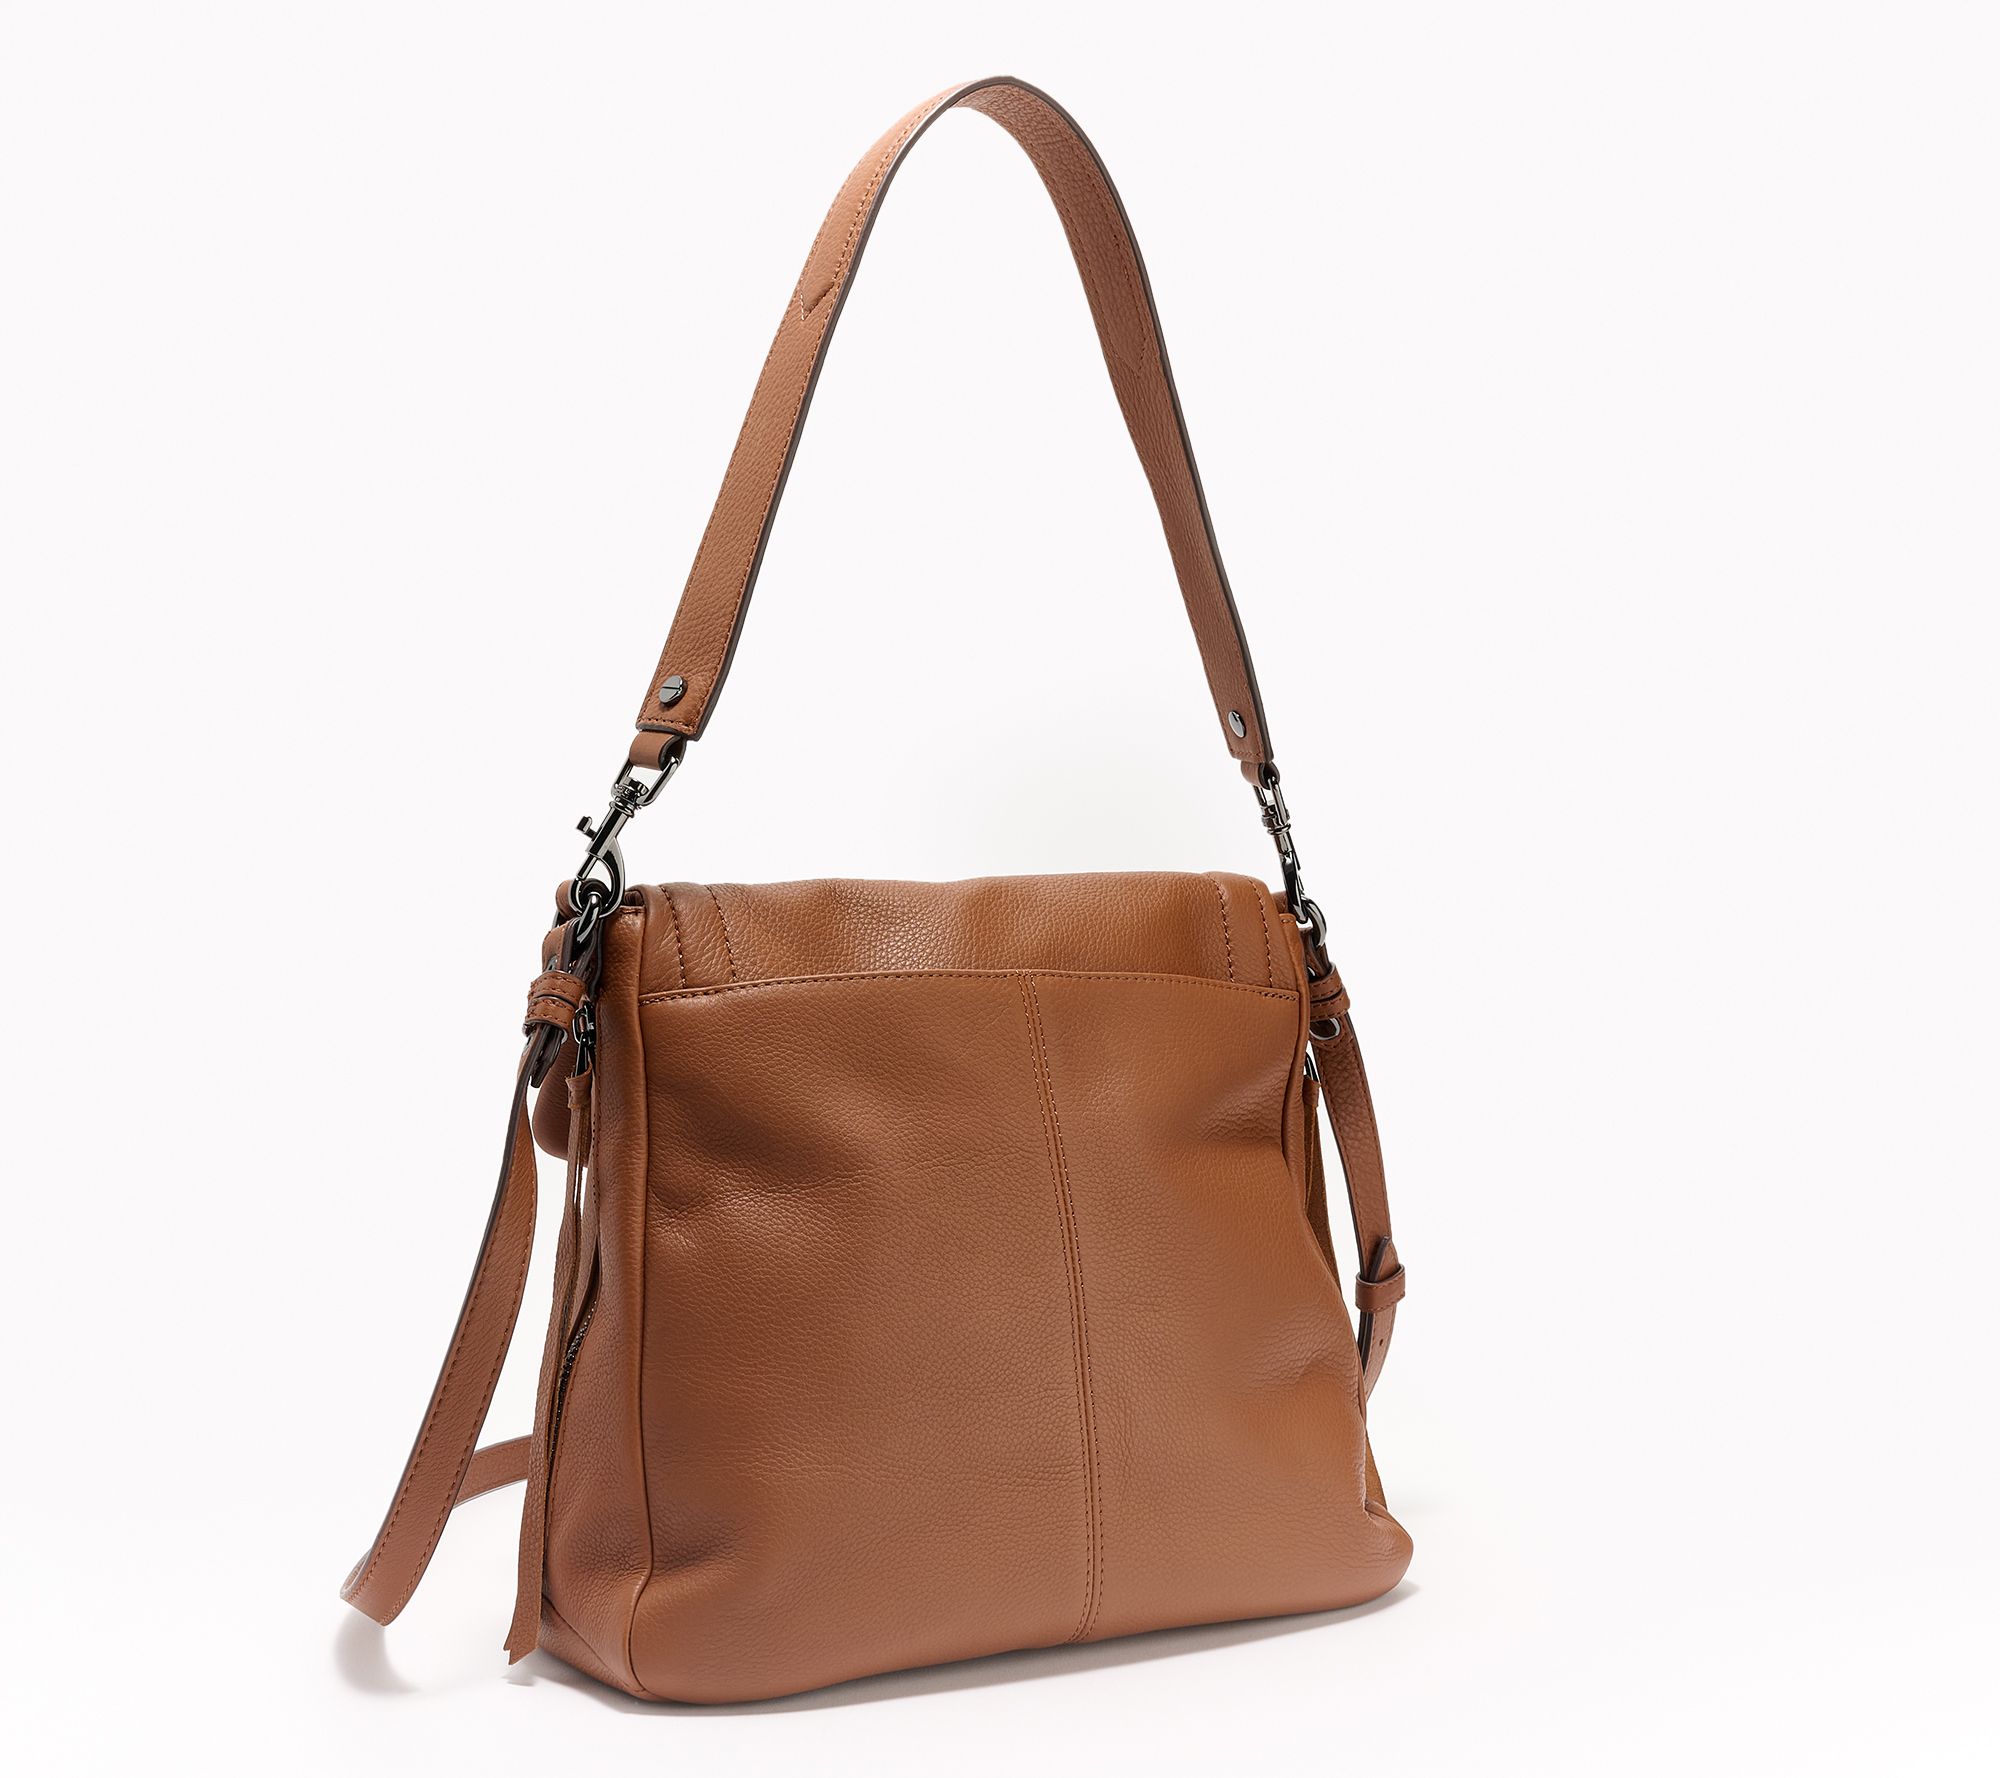 Sling Bags - Upto 50% to 80% OFF on Branded Side Purse/Sling Bags